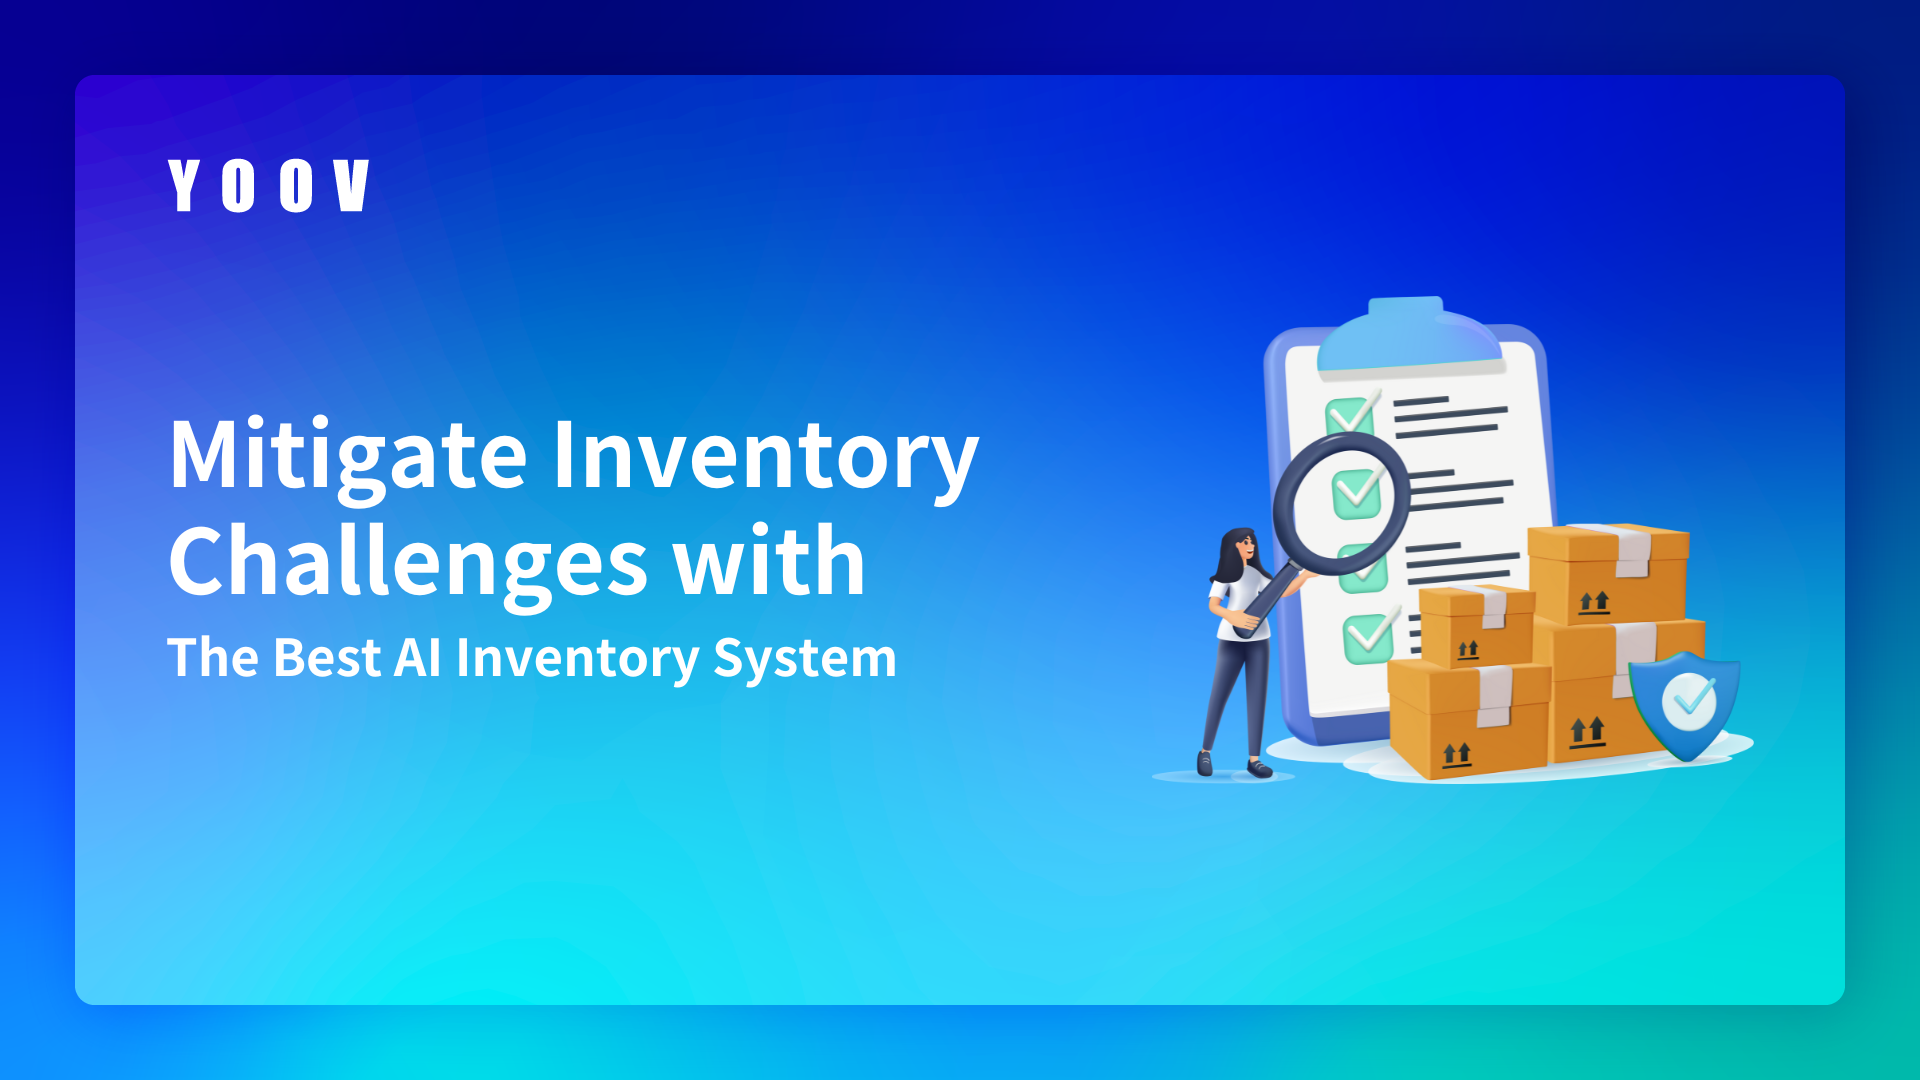 Mitigate Inventory Challenges with The Best AI Inventory System